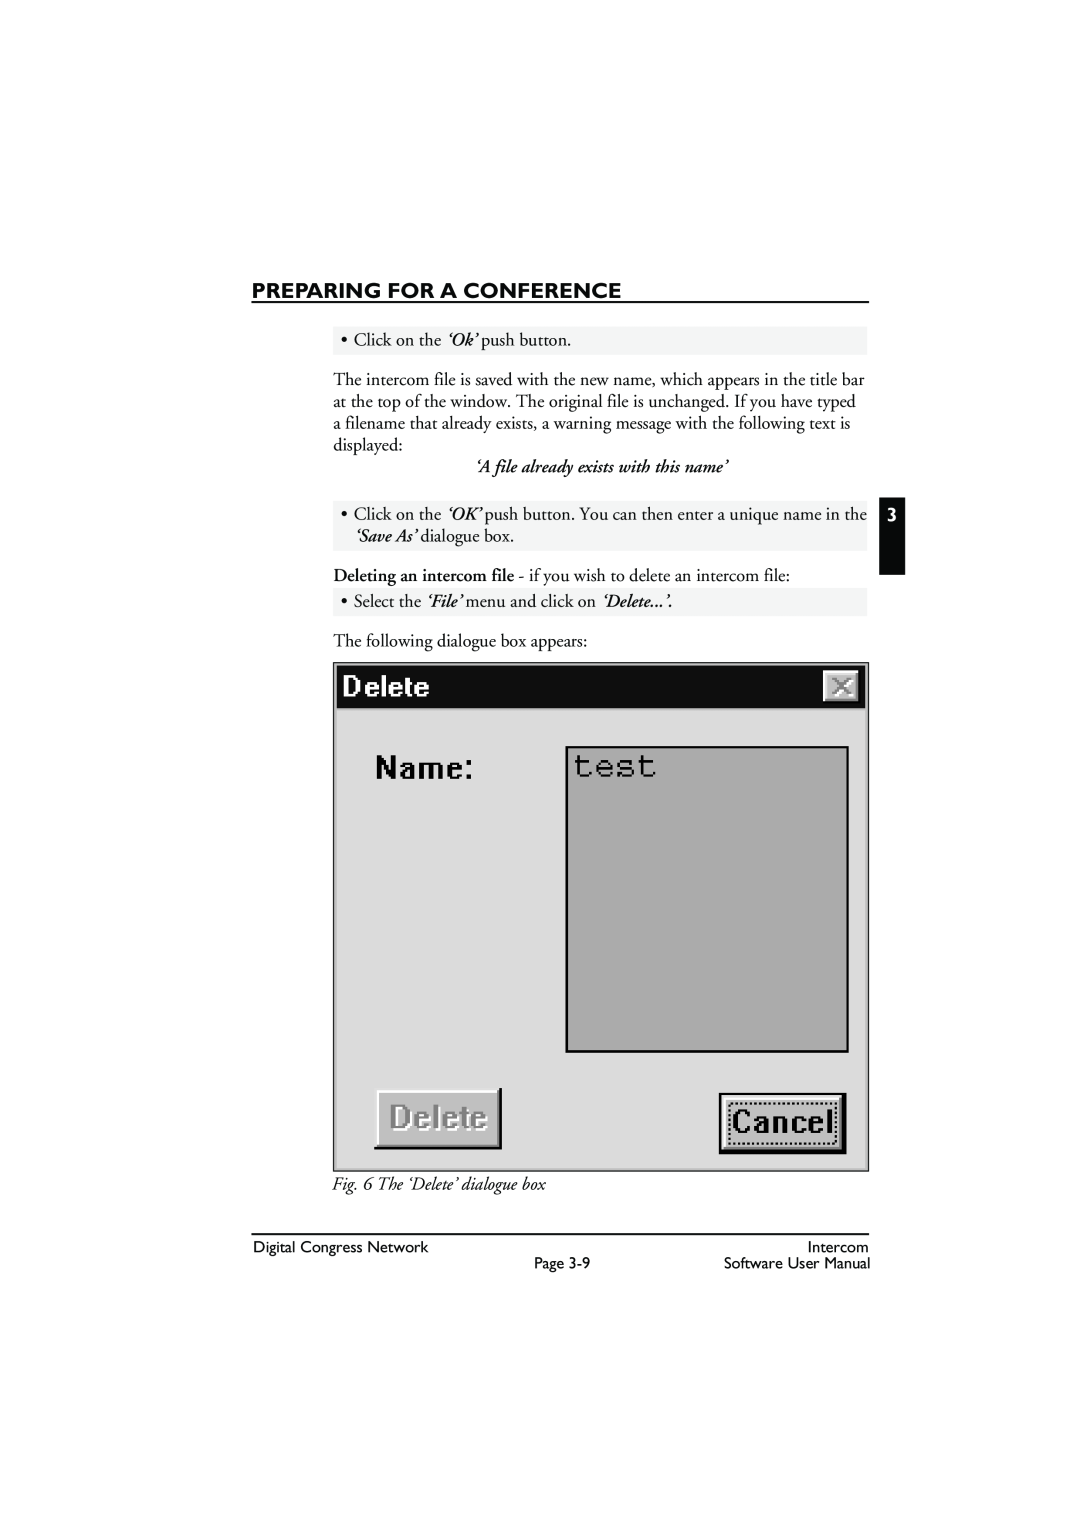 Bosch Appliances LBB 3573 user manual The ‘Delete’ dialogue box, Preparing For A Conference, Click on the ‘Ok’ push button 